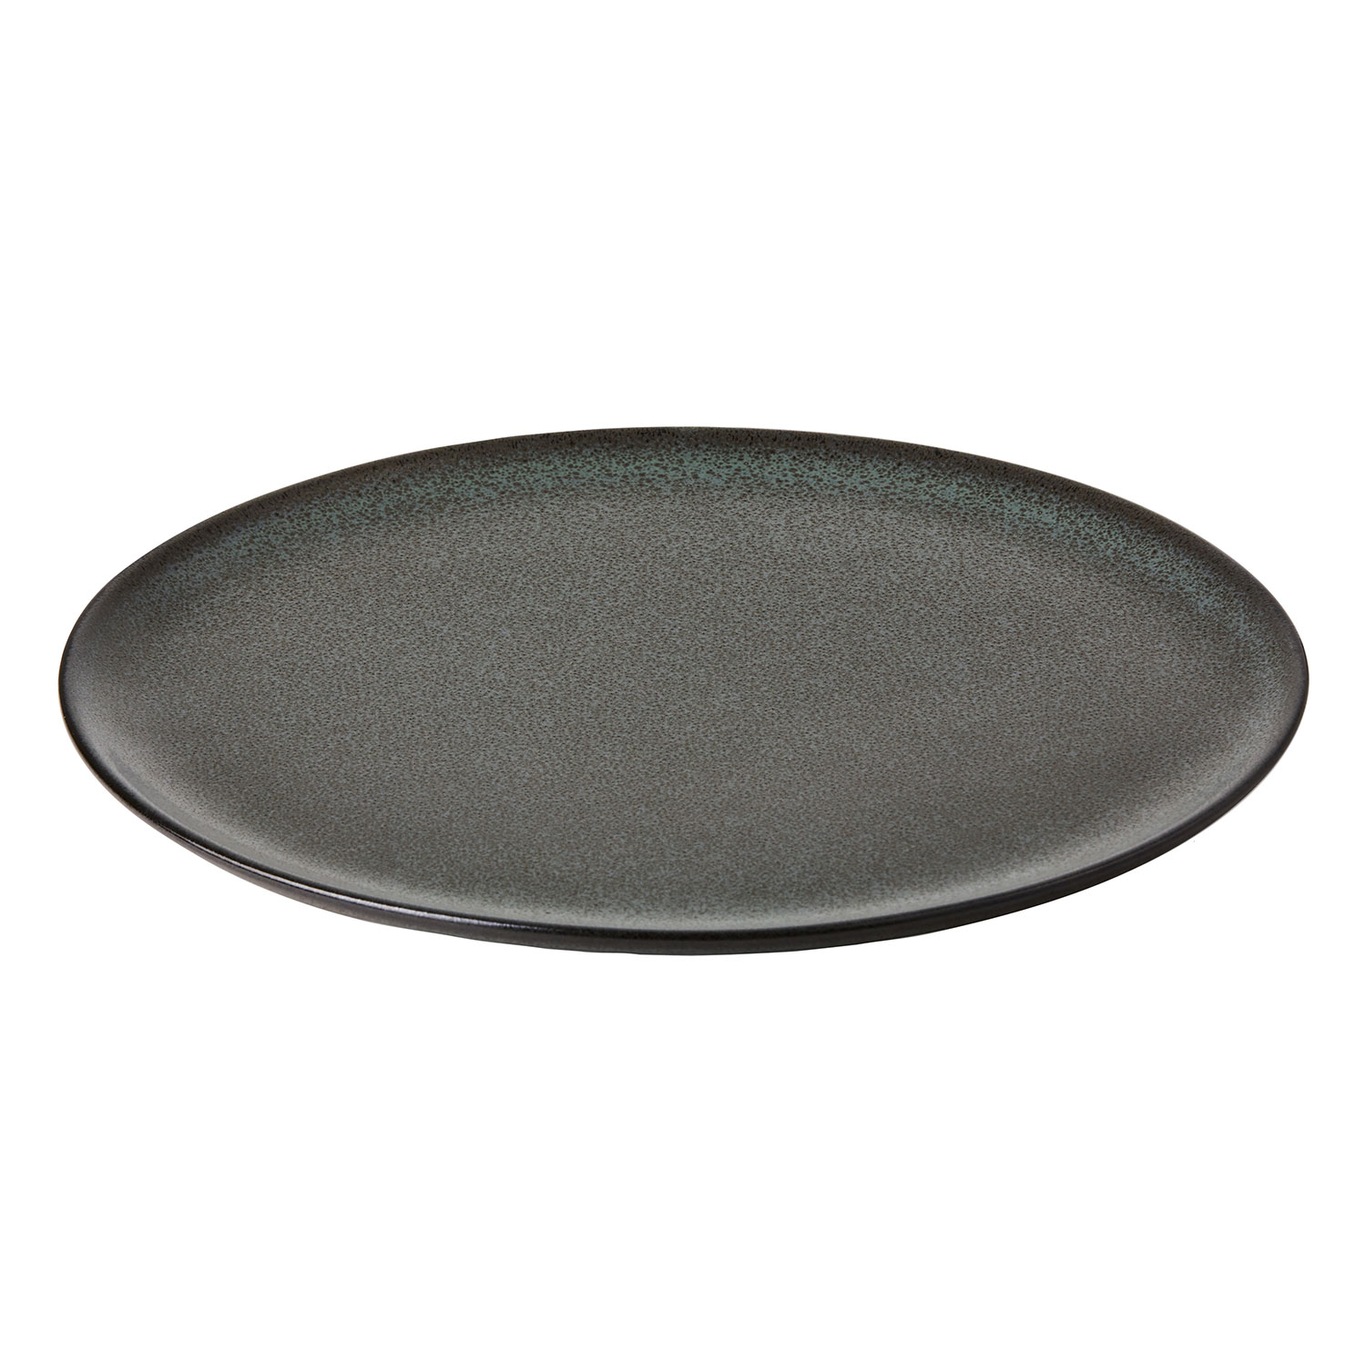 Raw Plate 28 cm, Northern Green